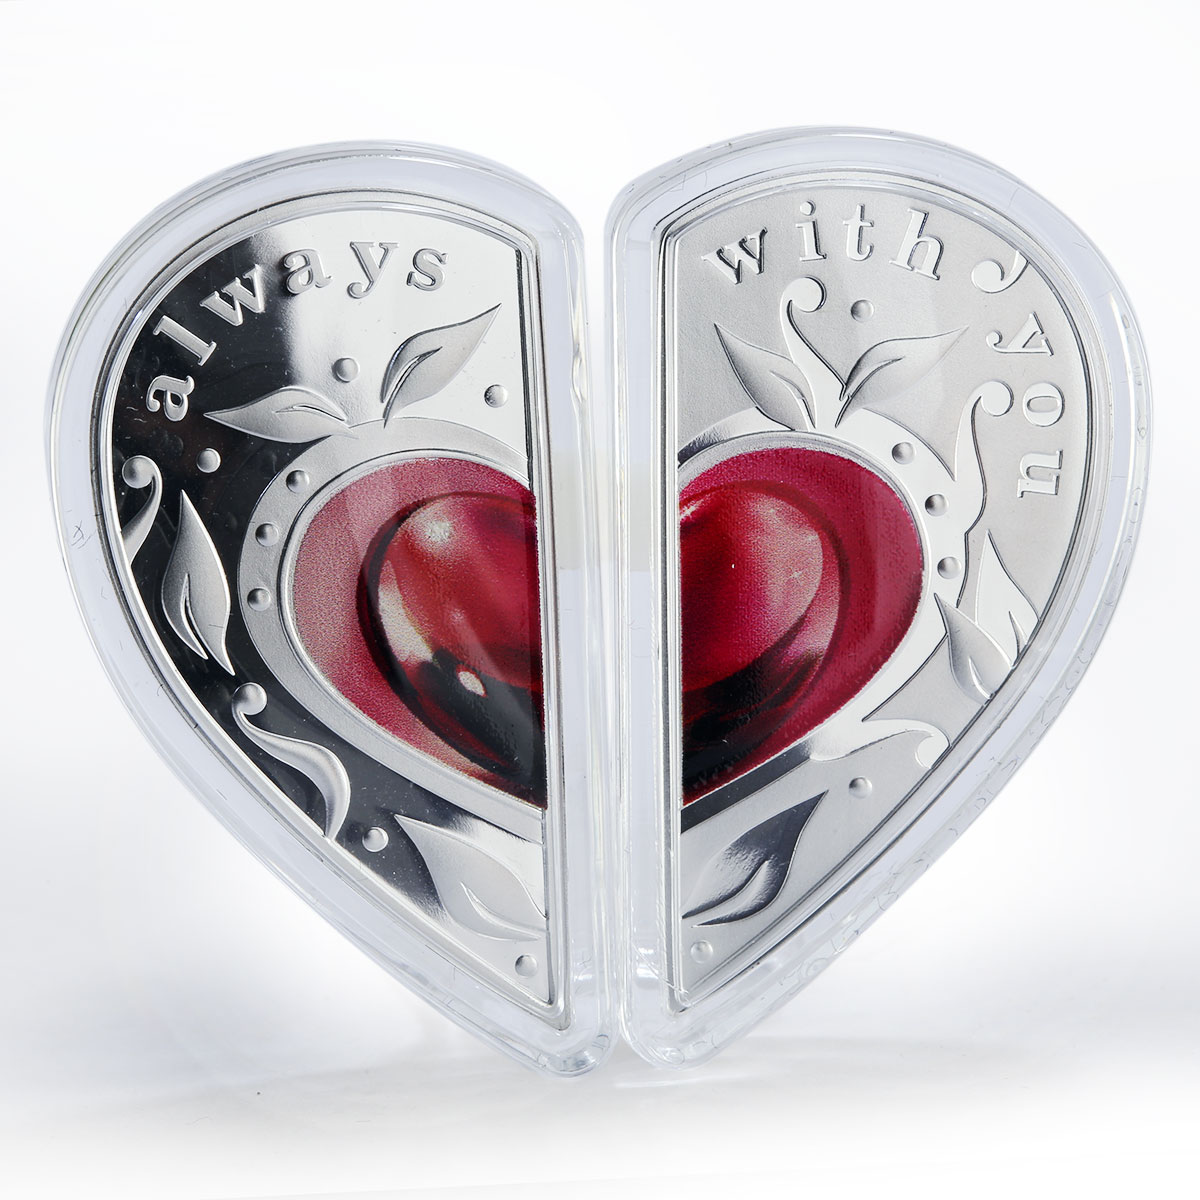 Niue set of 2 coins Always with You Heart Love colored silver coins 2014